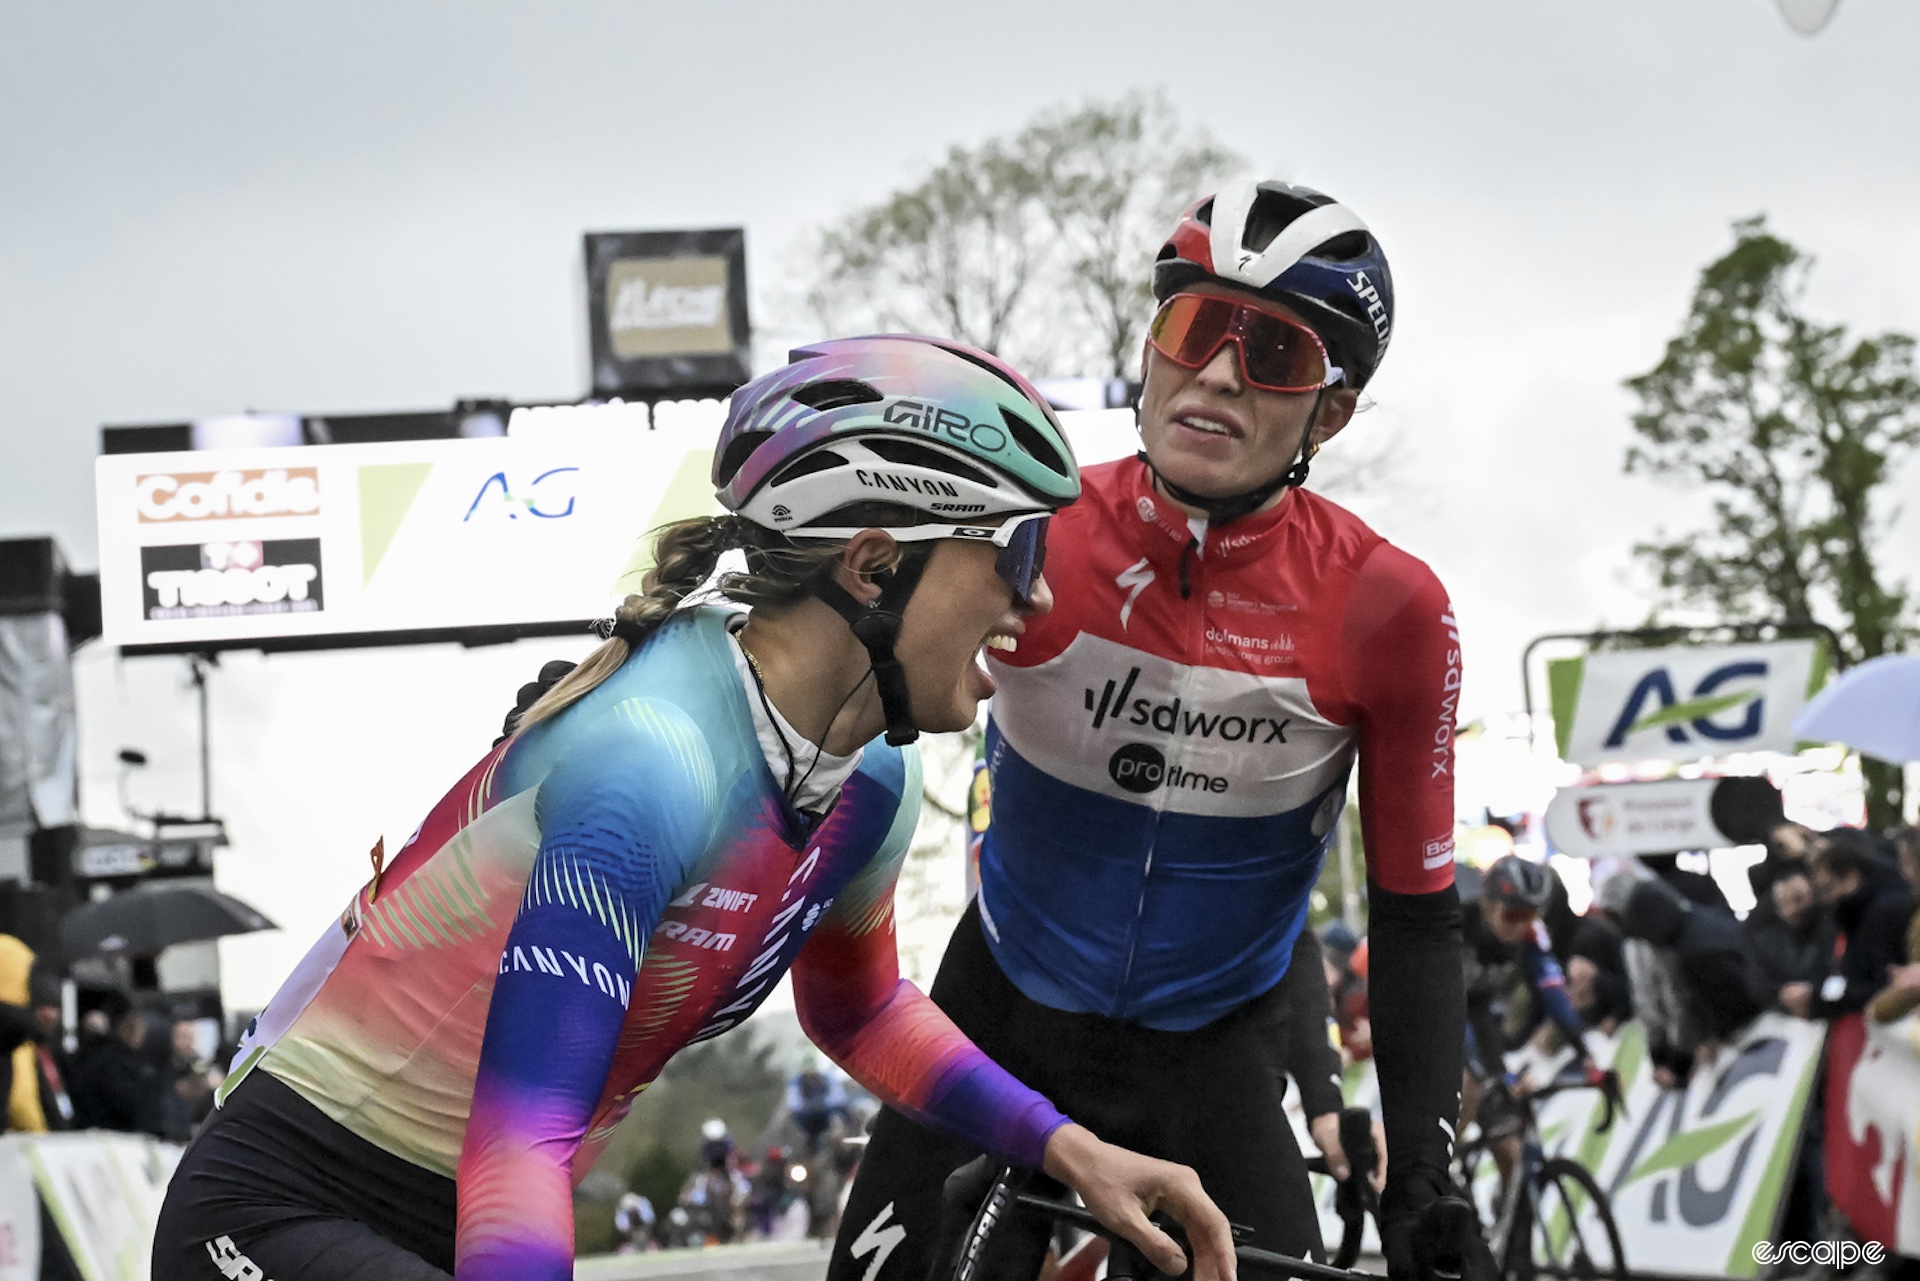 Demi Vollering congratulates Kasia Niewiadoma on her Fleche Wallonne win. Kasia is laughing and crying at the same time while Vollering pats her on the back.